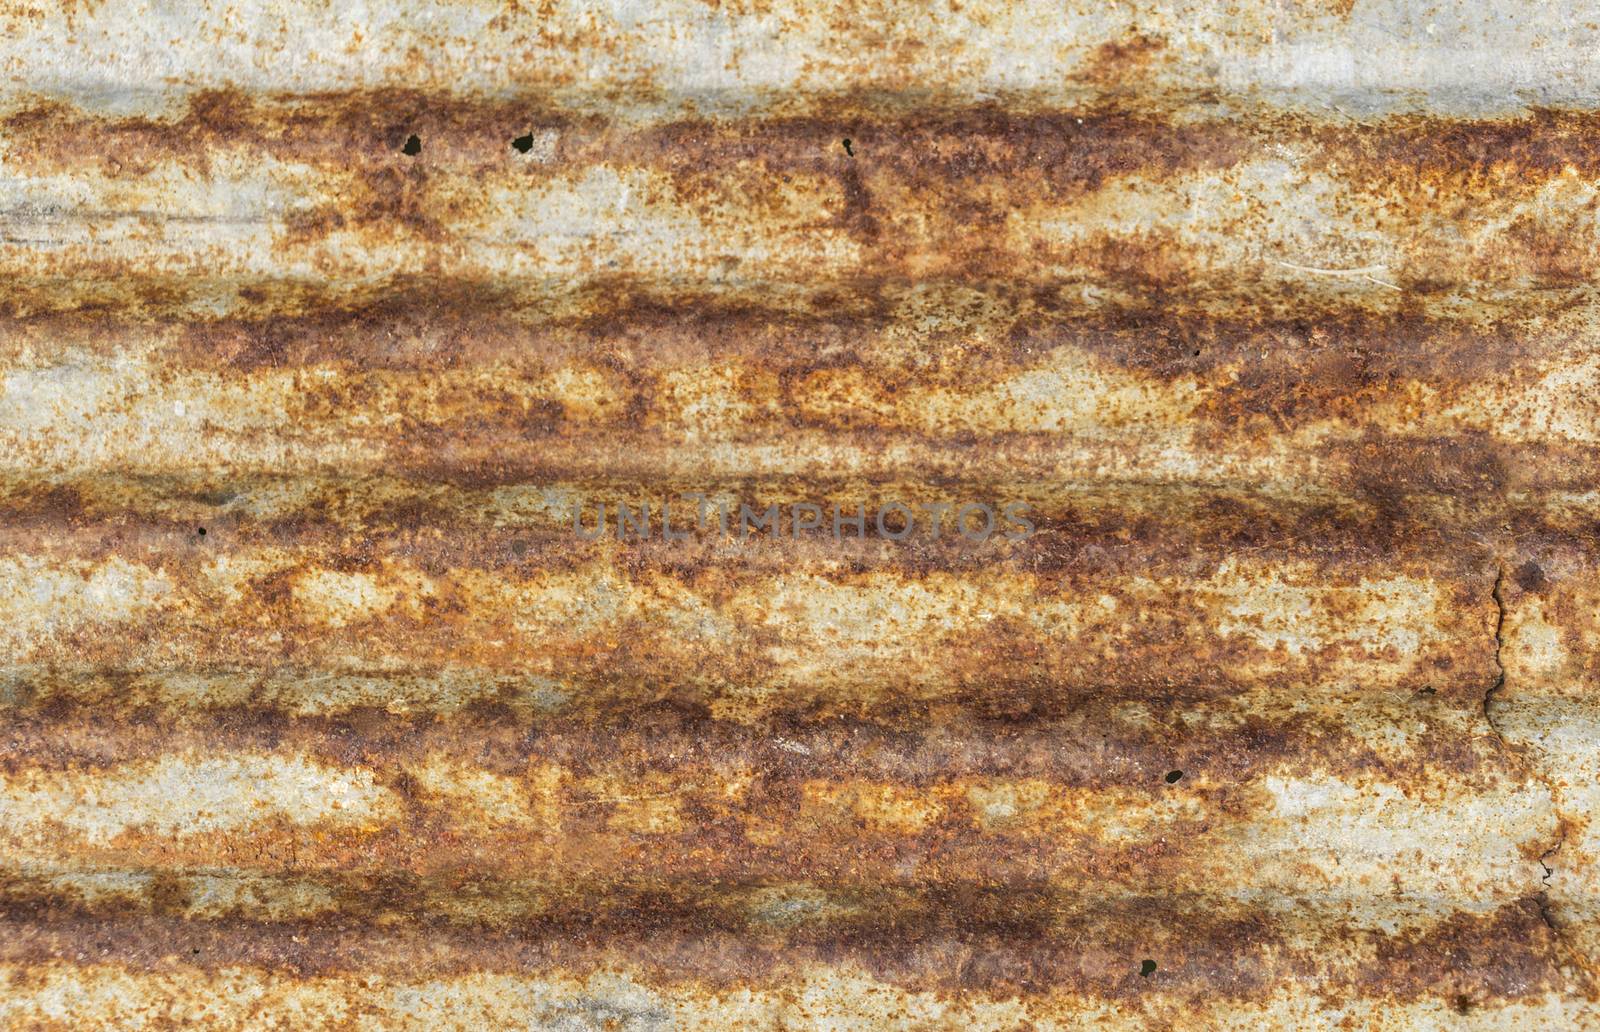 Rusty corrugated metal roofing texture by chingraph